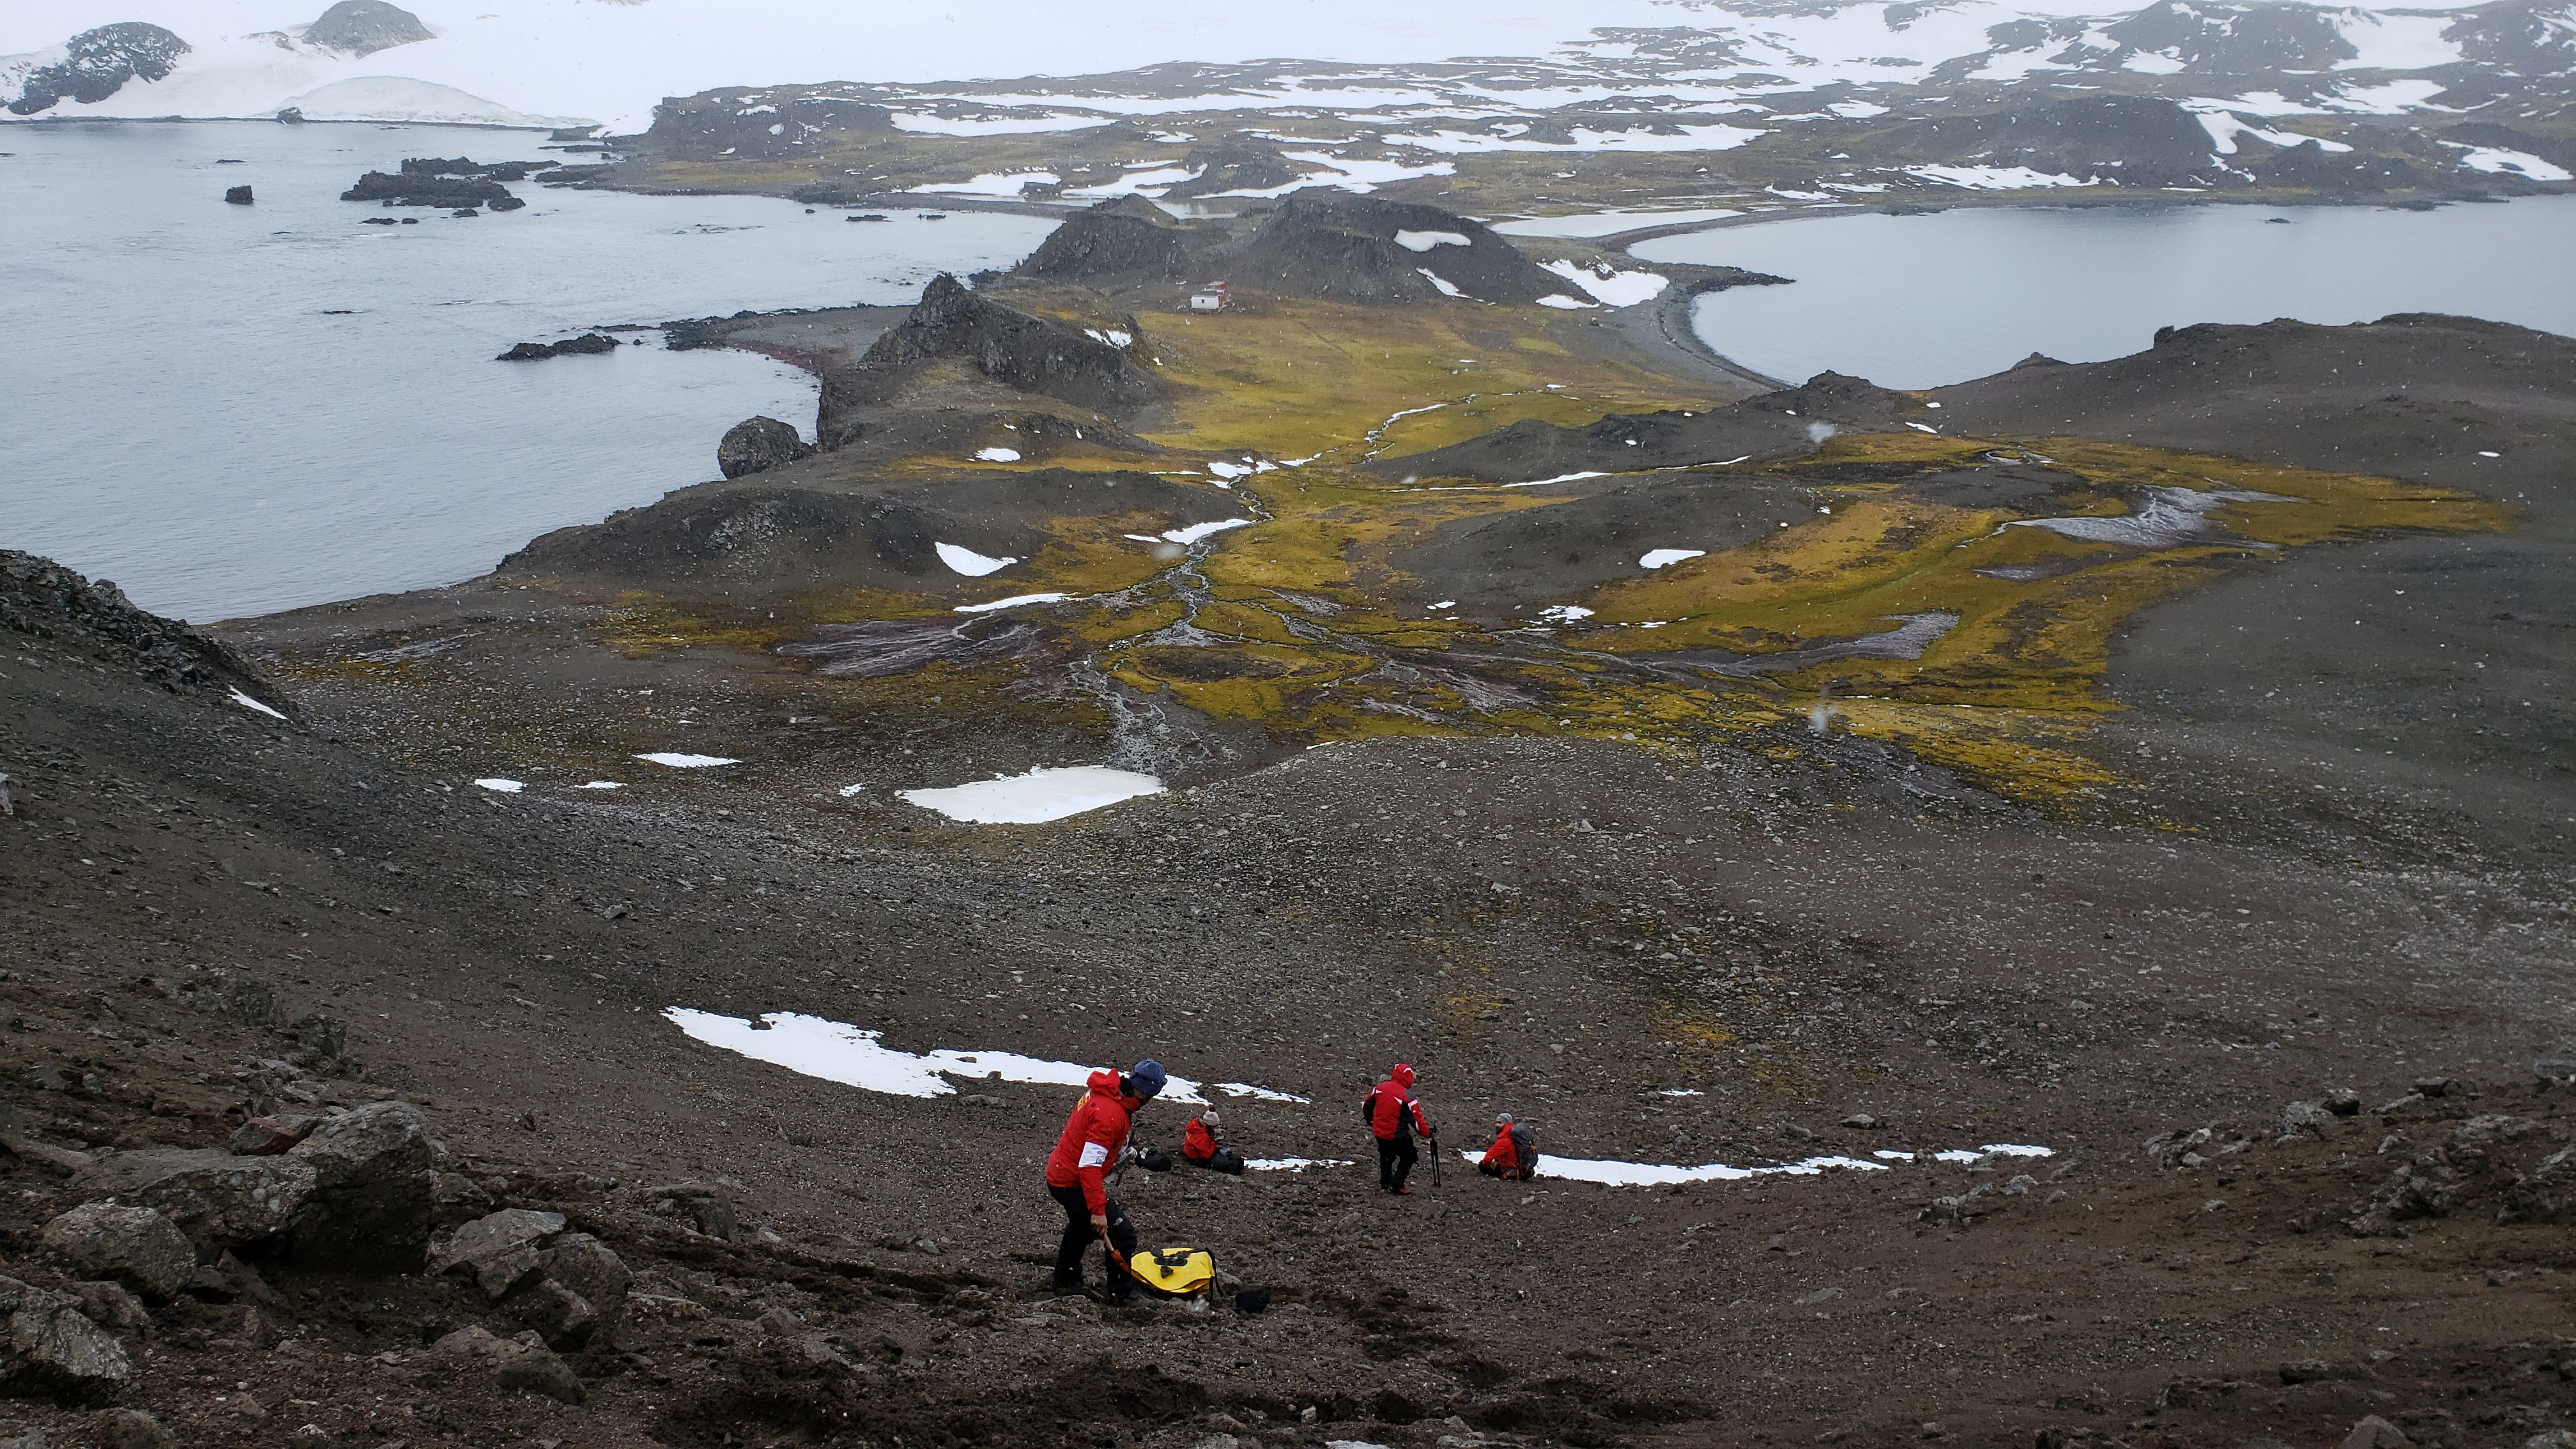 Scientists from the University of Chile collect organic material as they look for a bacteria discovered in Antarctica